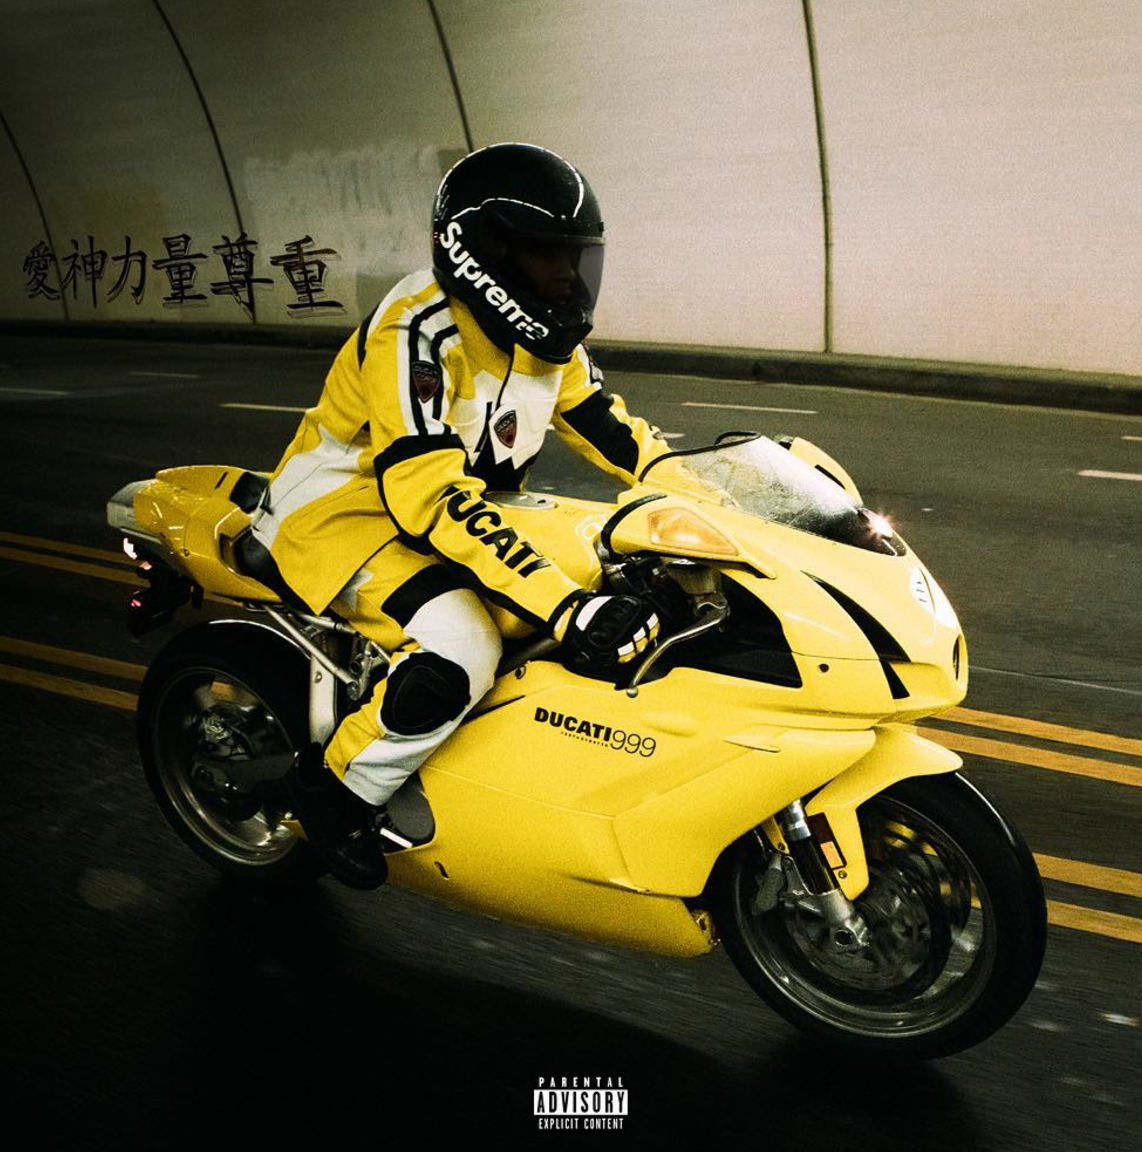 New Music: Tyga – “Move To L.A.” Feat. Ty Dolla $ign [LISTEN]